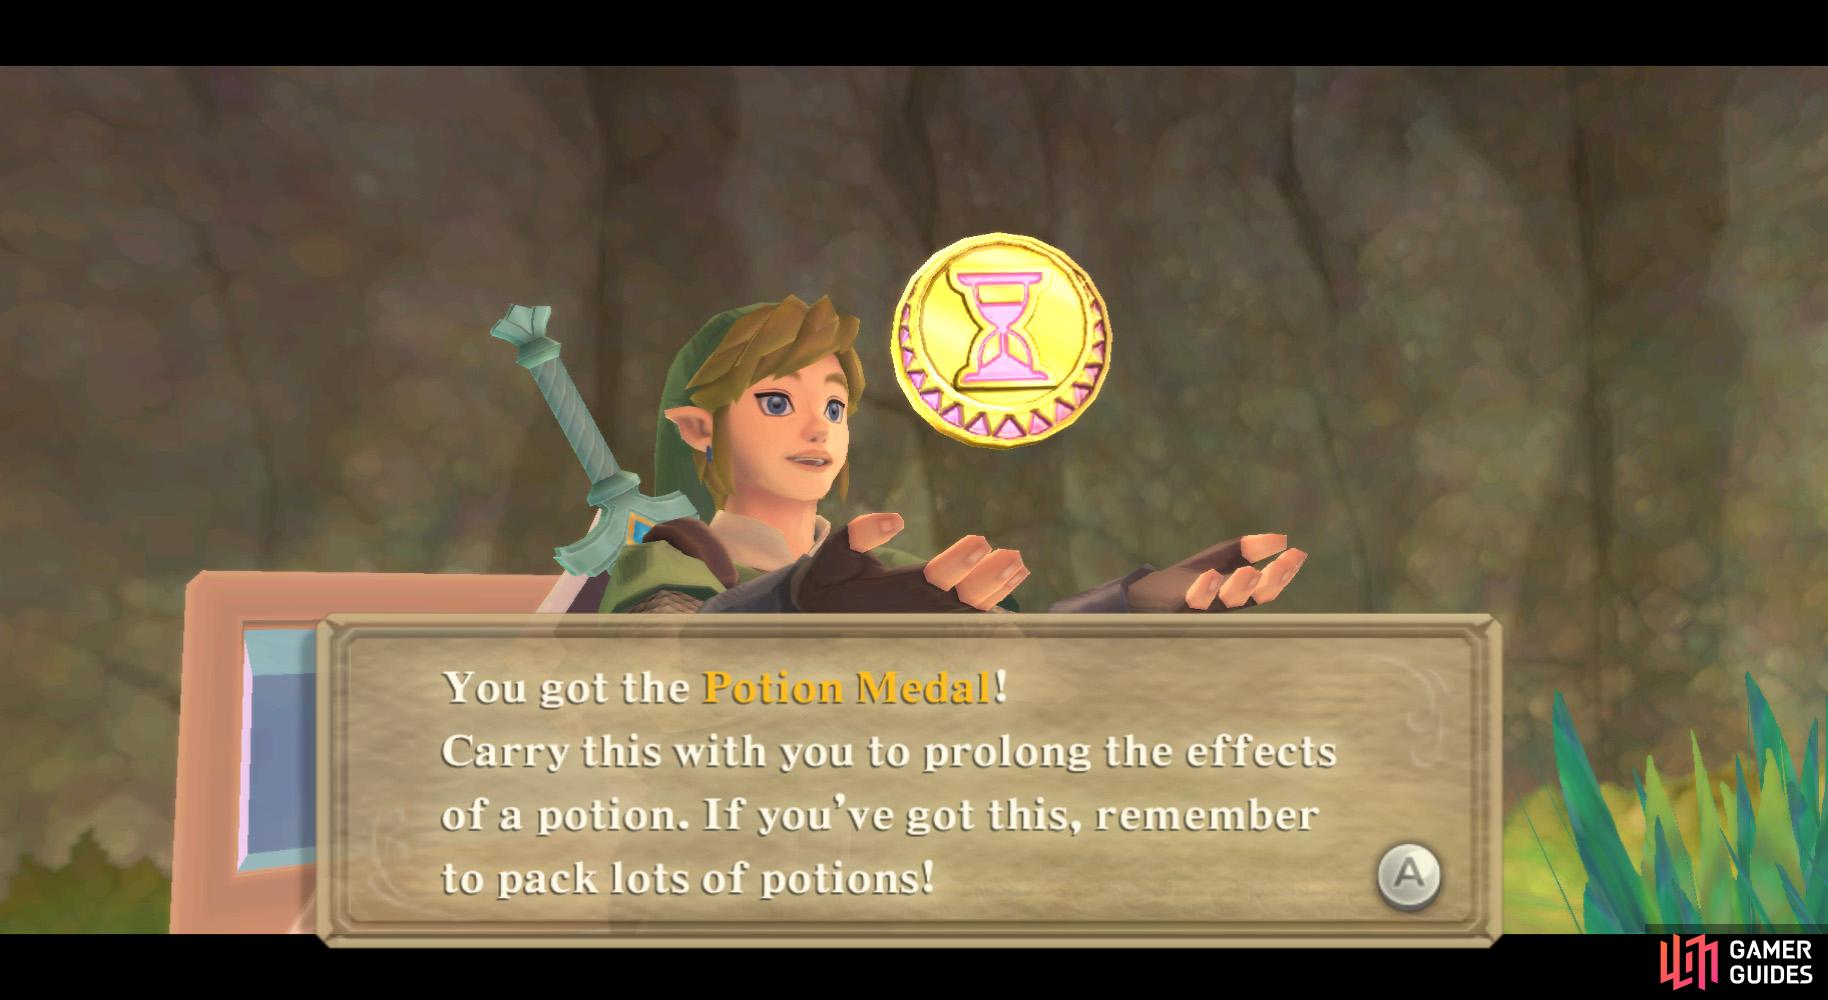 There's only one Potion Medal, but that's all you need.